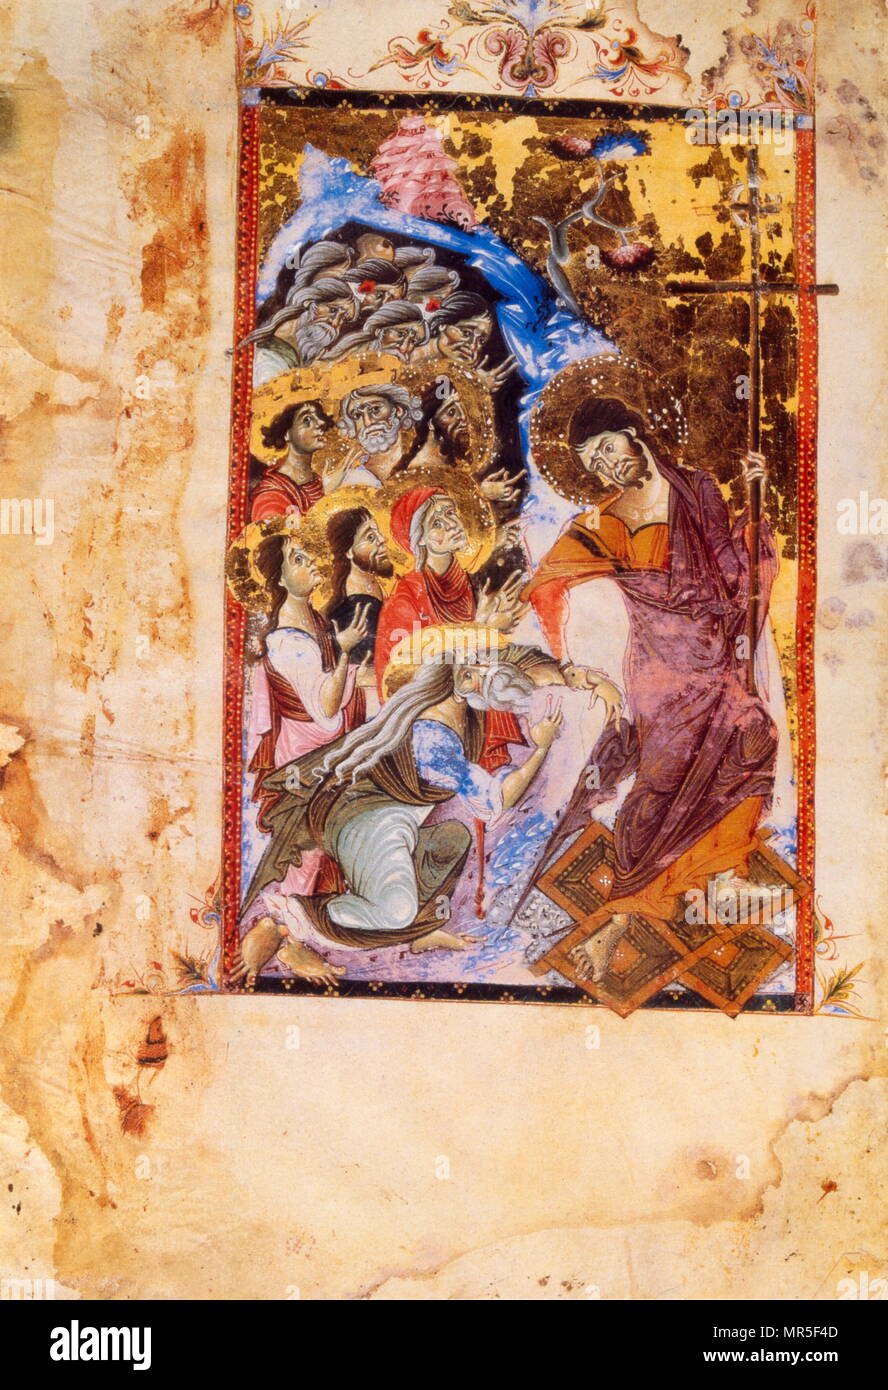 Armenian Christian illustrated manuscript showing the burial of Jesus after crucifixion, described in the New Testament. According to the canonical gospel accounts, he was placed in a tomb by a man named Joseph of Arimathea. 13th century Stock Photo